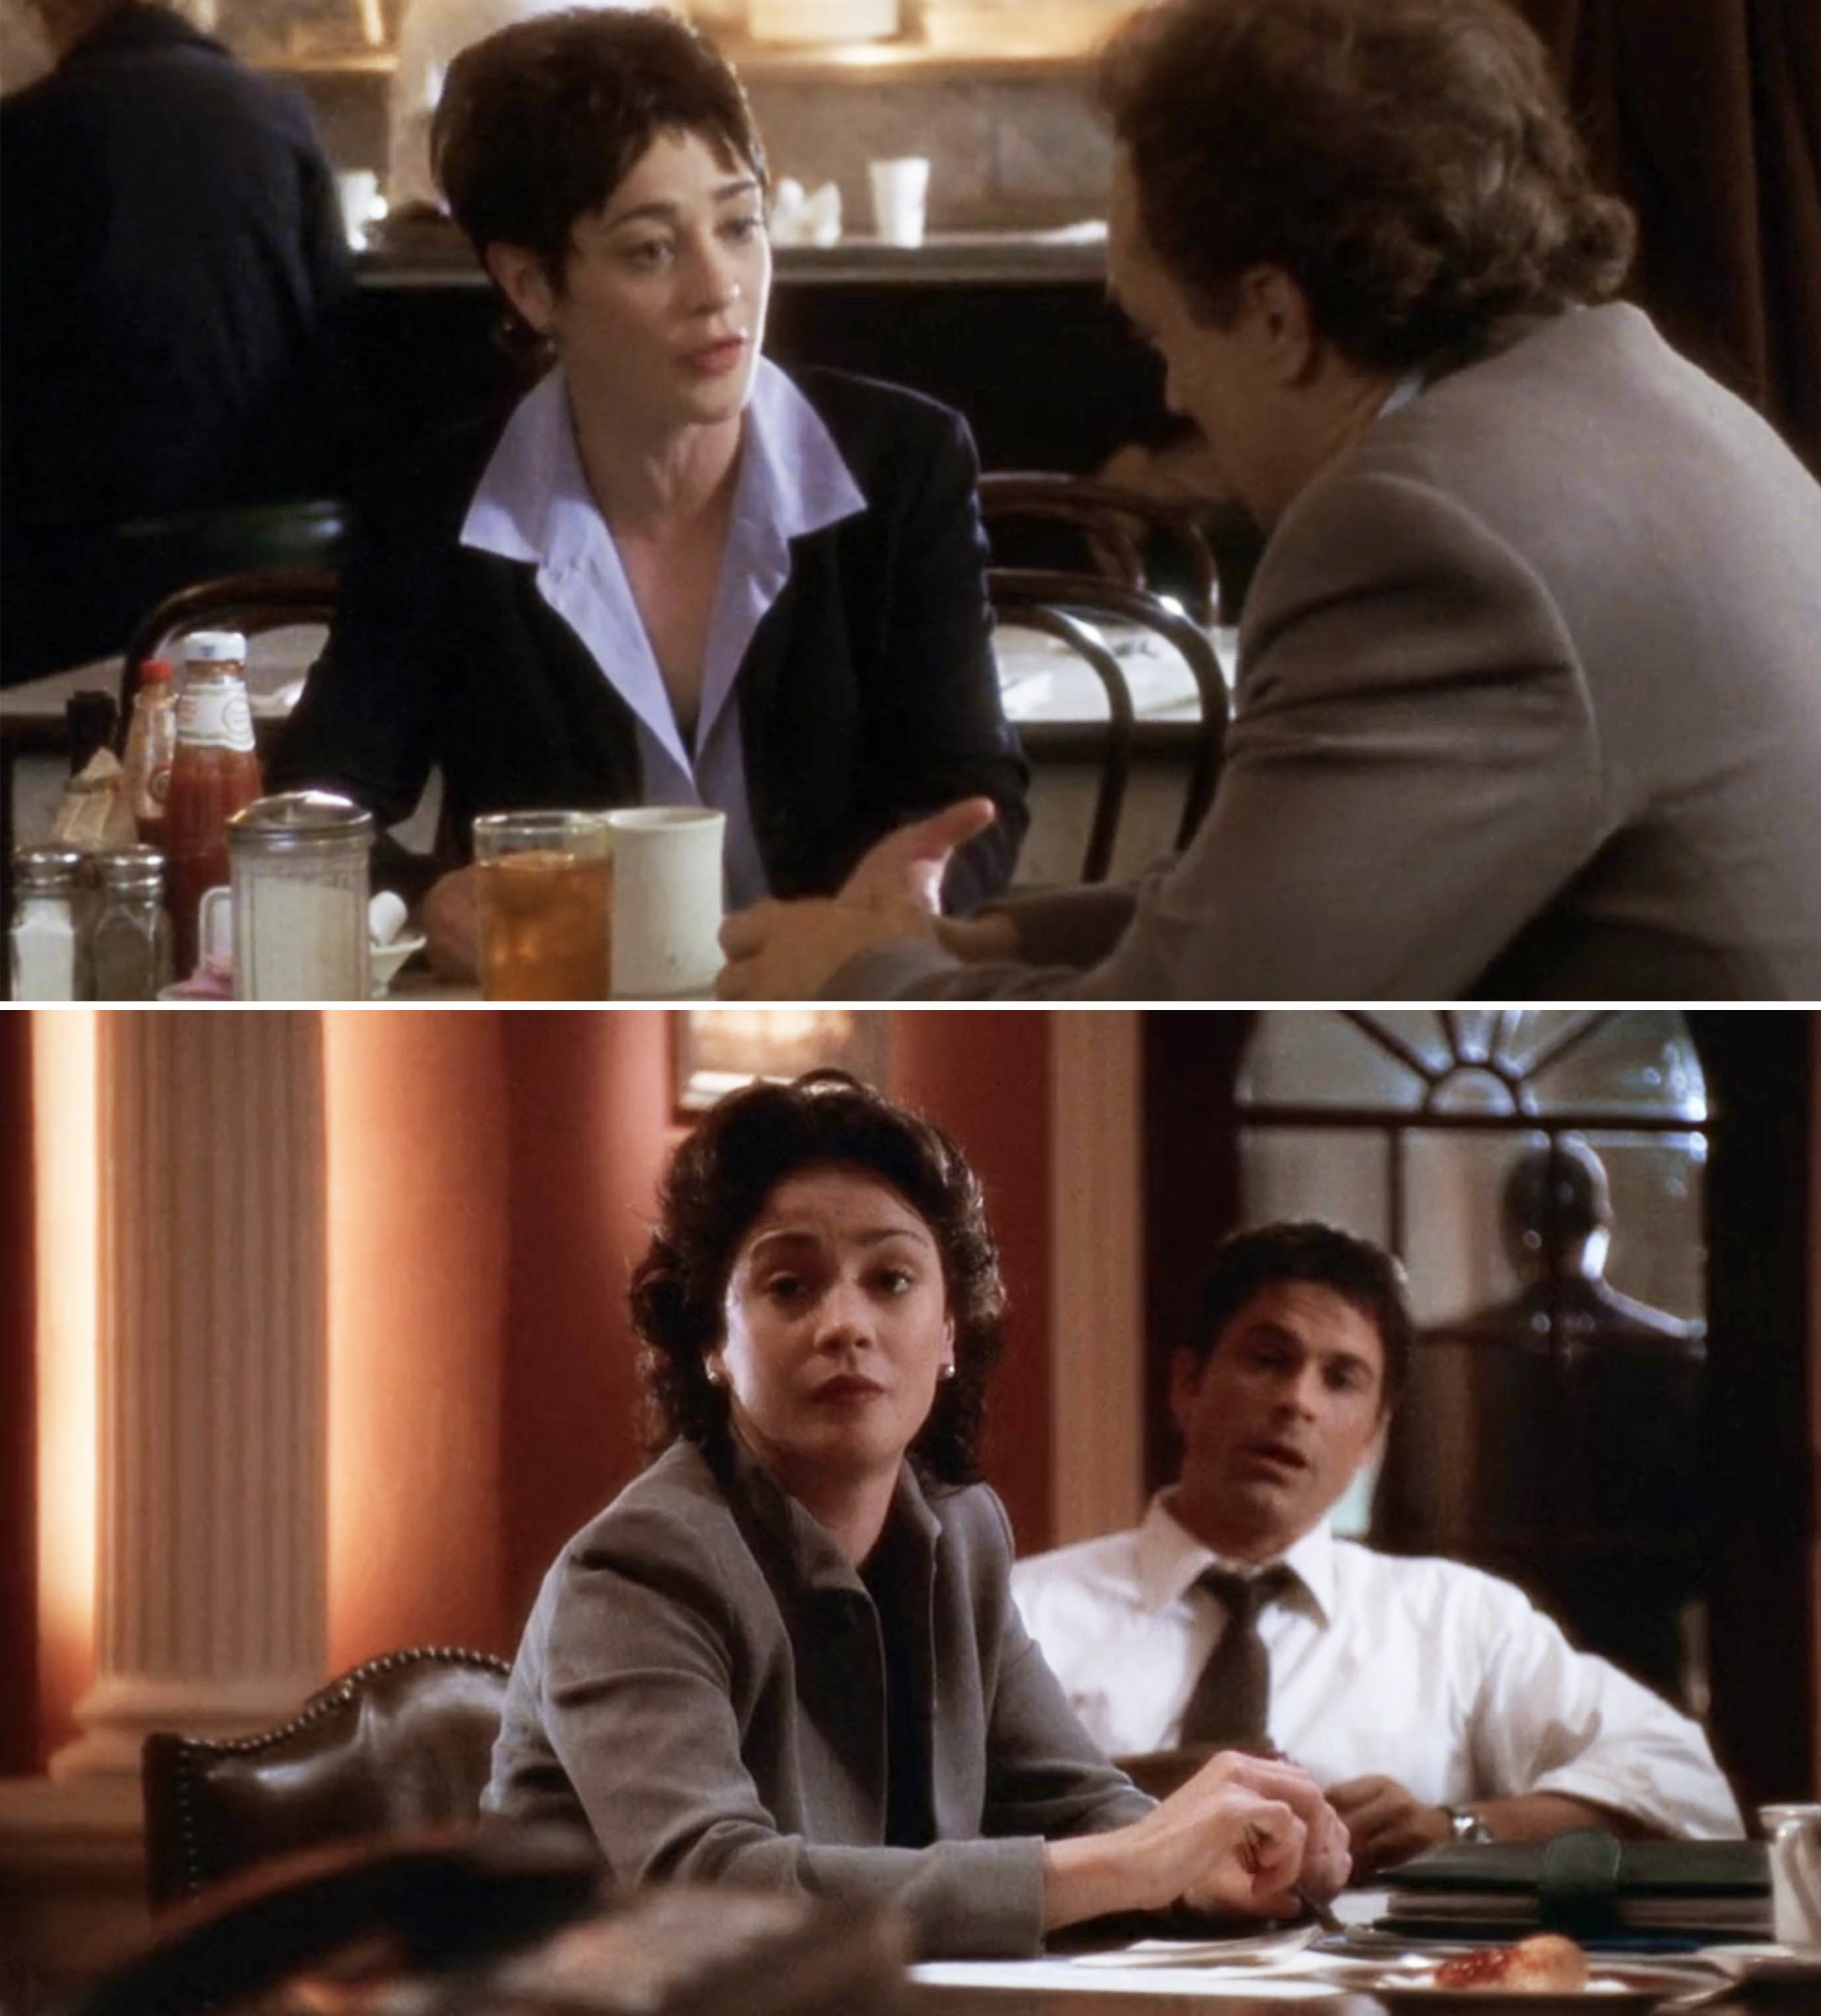 Two scenes from a TV show featuring the same actress in different conversations